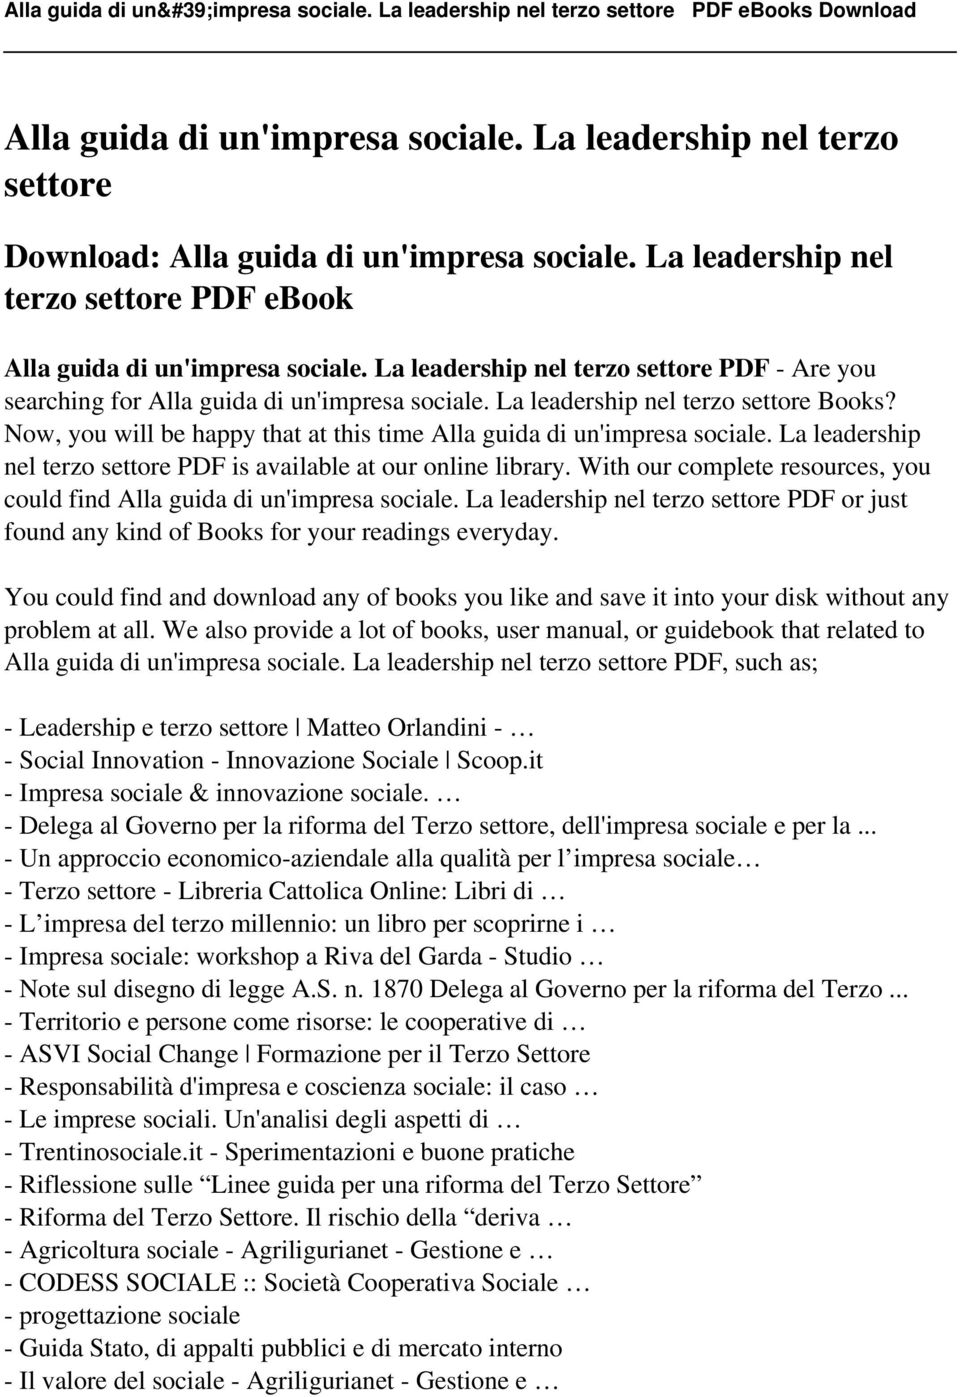 Now, you will be happy that at this time Alla guida di un'impresa sociale. La leadership nel terzo settore PDF is available at our online library.